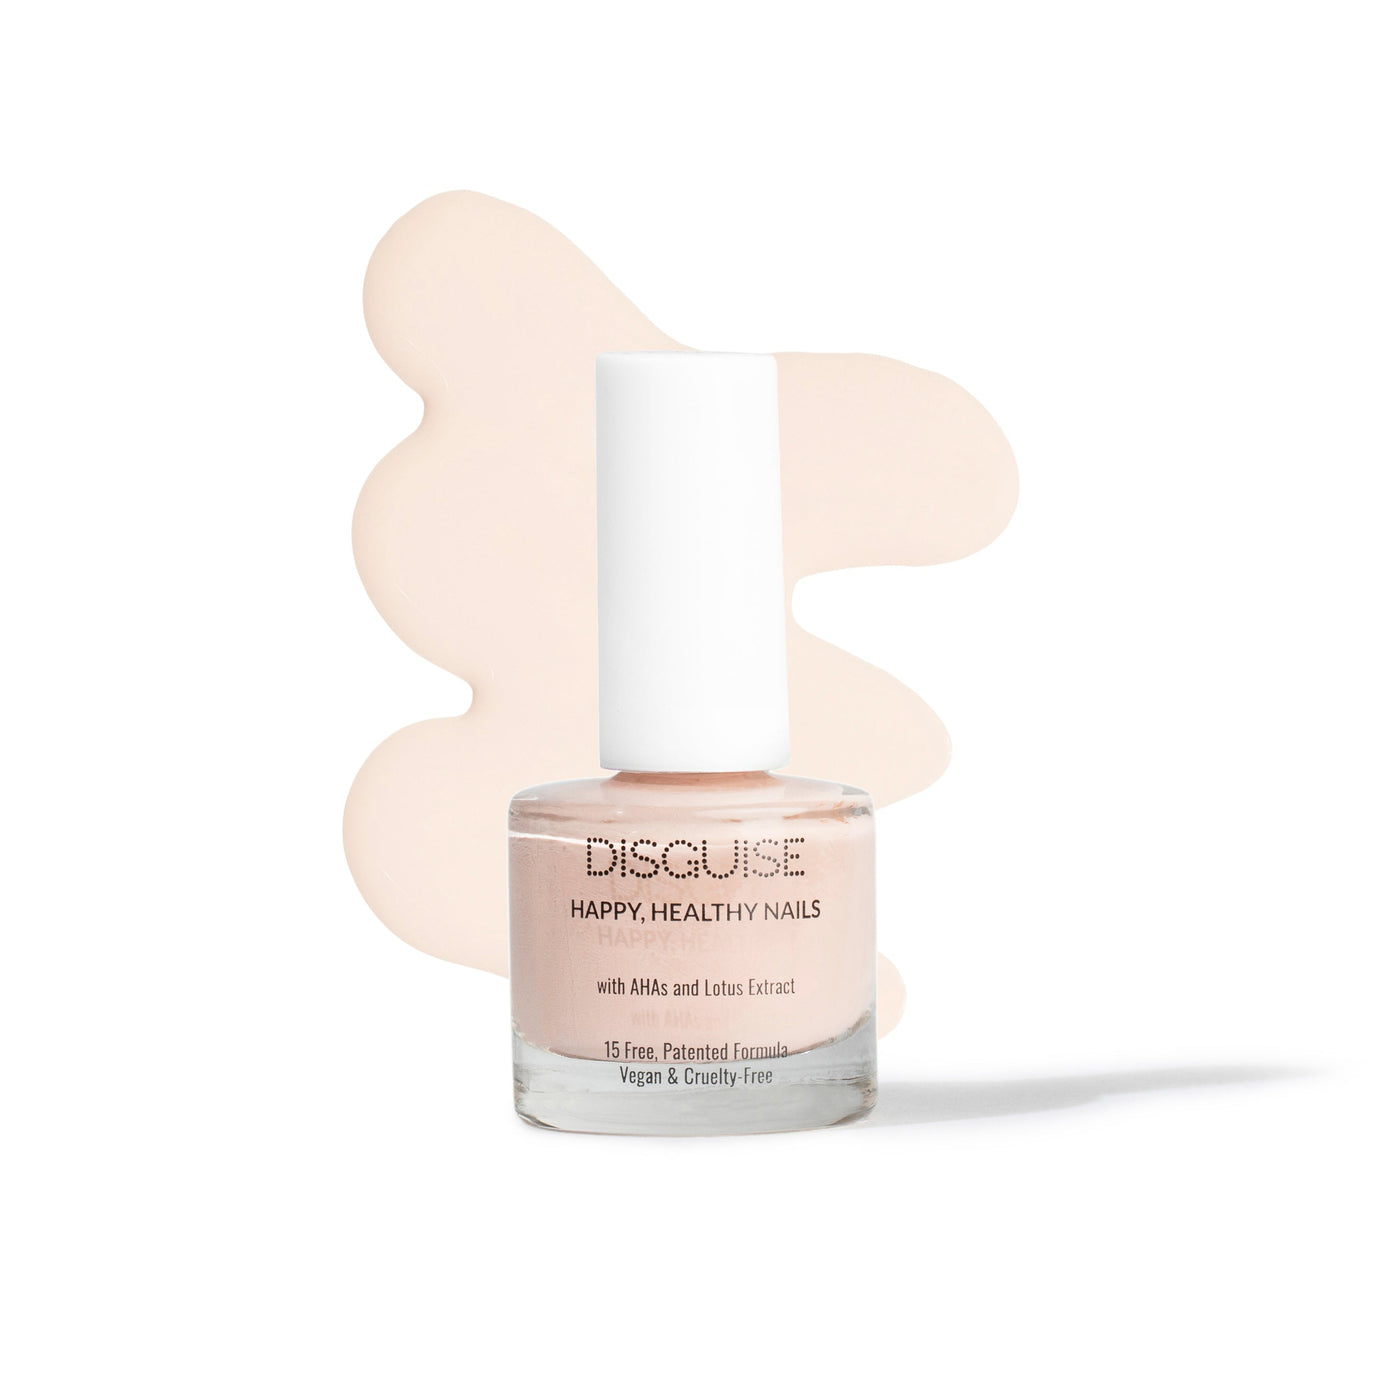 Happy Healthy Nail Polish Butterscotch 116: 21 TOXIN FREE | WITH AHA & LOTUS EXTRACT | REPAIRS & STREGTHENS NAILS | 9 ml